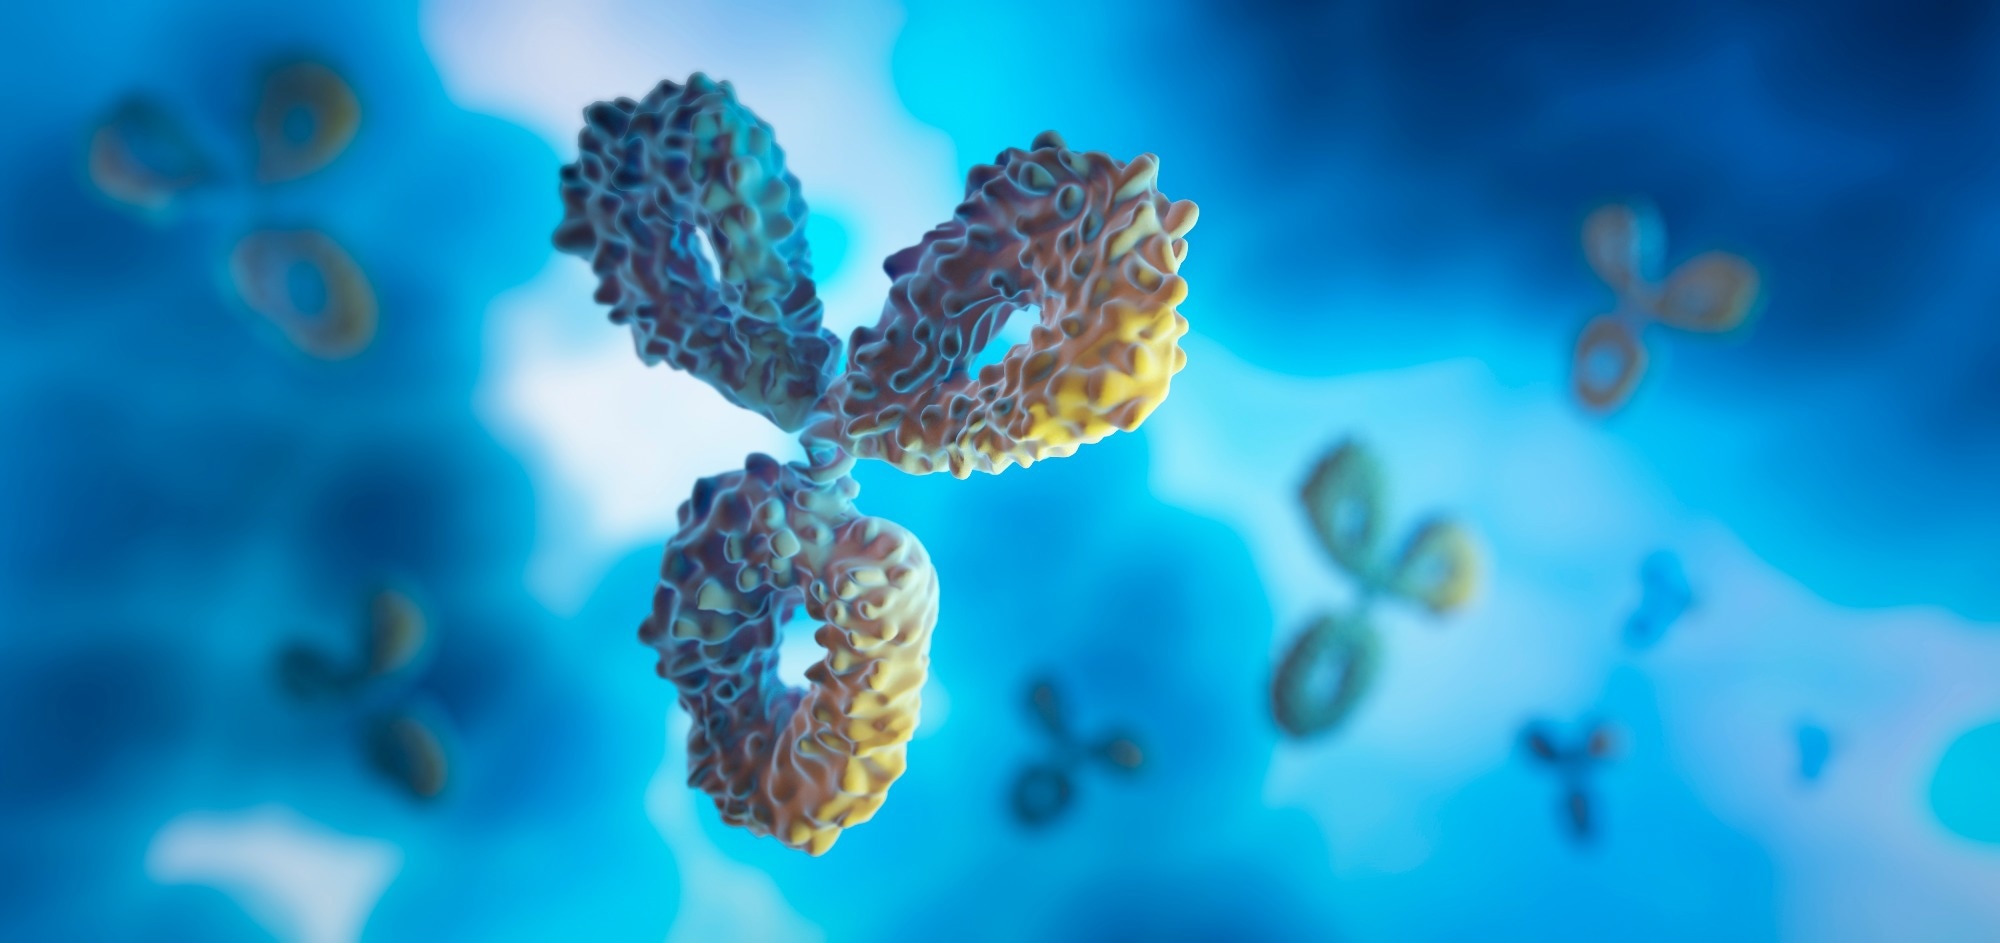 Predictors of long-term neutralizing antibody titers following COVID-19 vaccination by three vaccine types: the BOOST study. Image Credit: Shutterstock